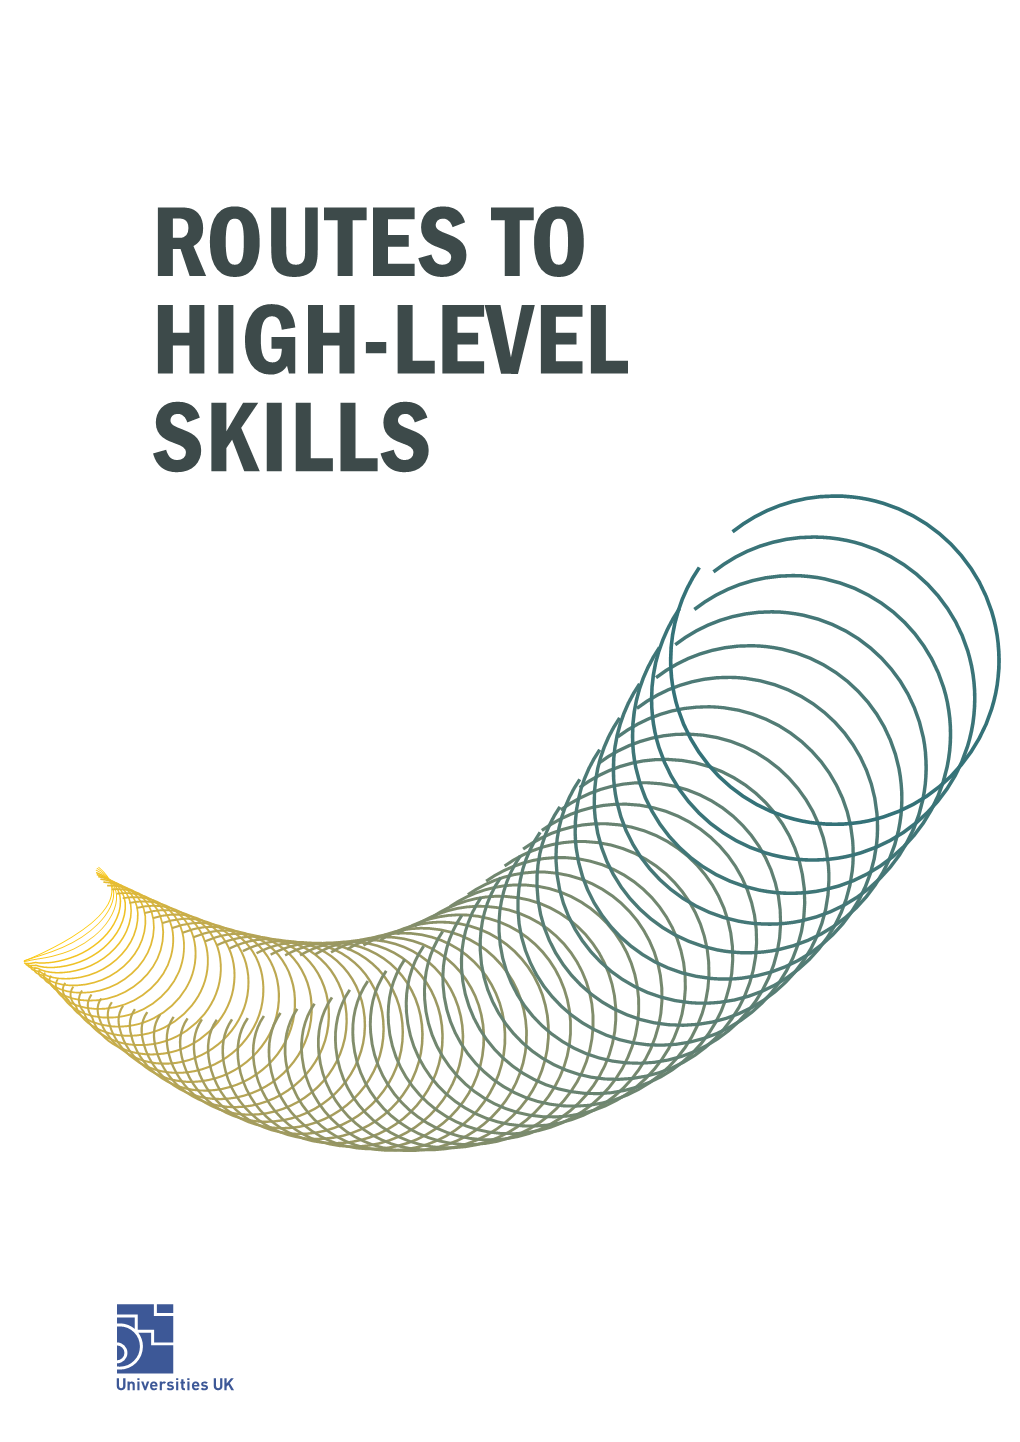 Routes to High-Level Skills Contents